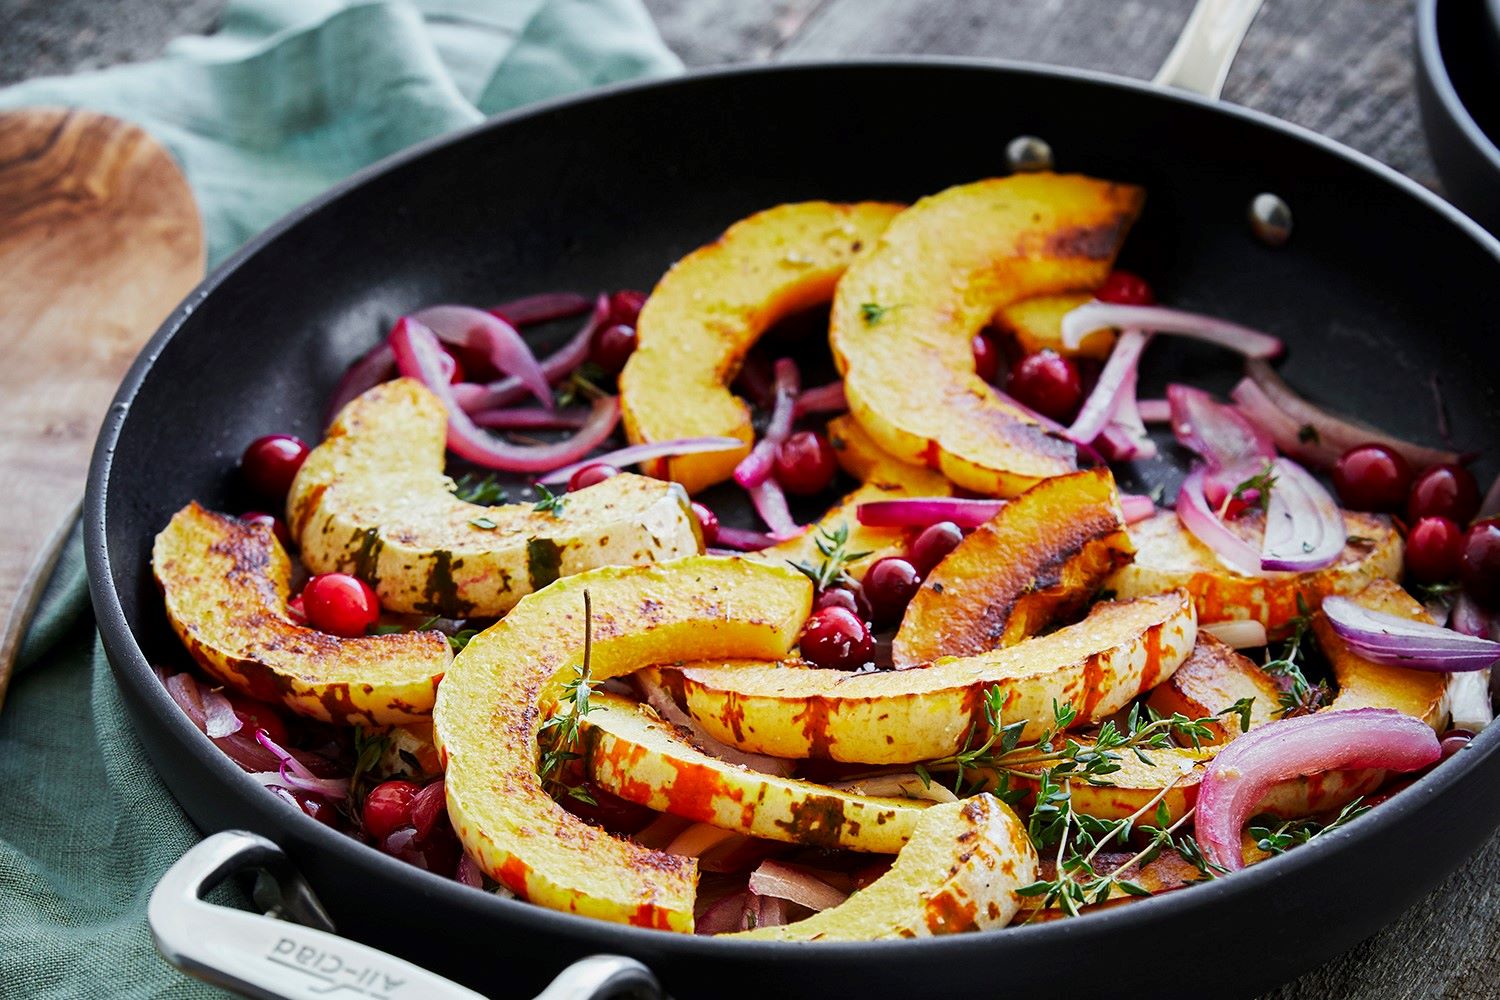 Get the Roasted Winter Squash with Red Onions and Cranberries recipe!